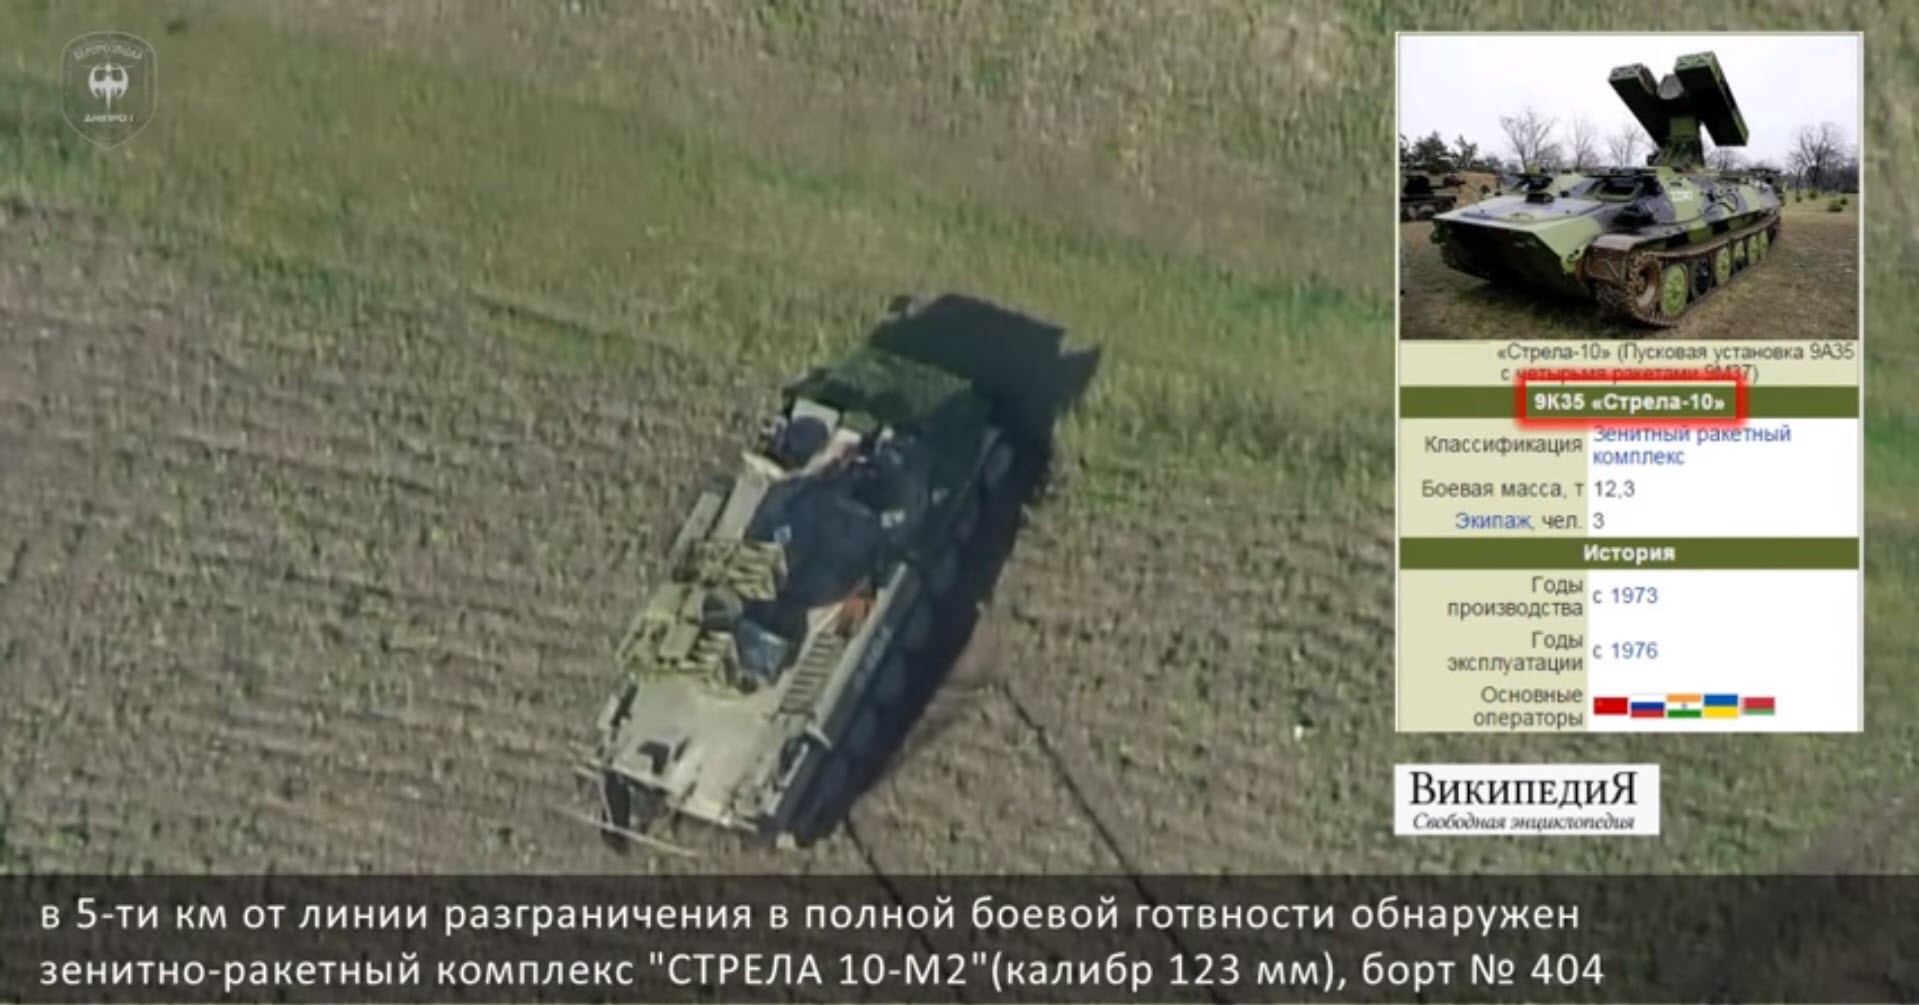 MH17 as a Result of a Pattern of Escalation